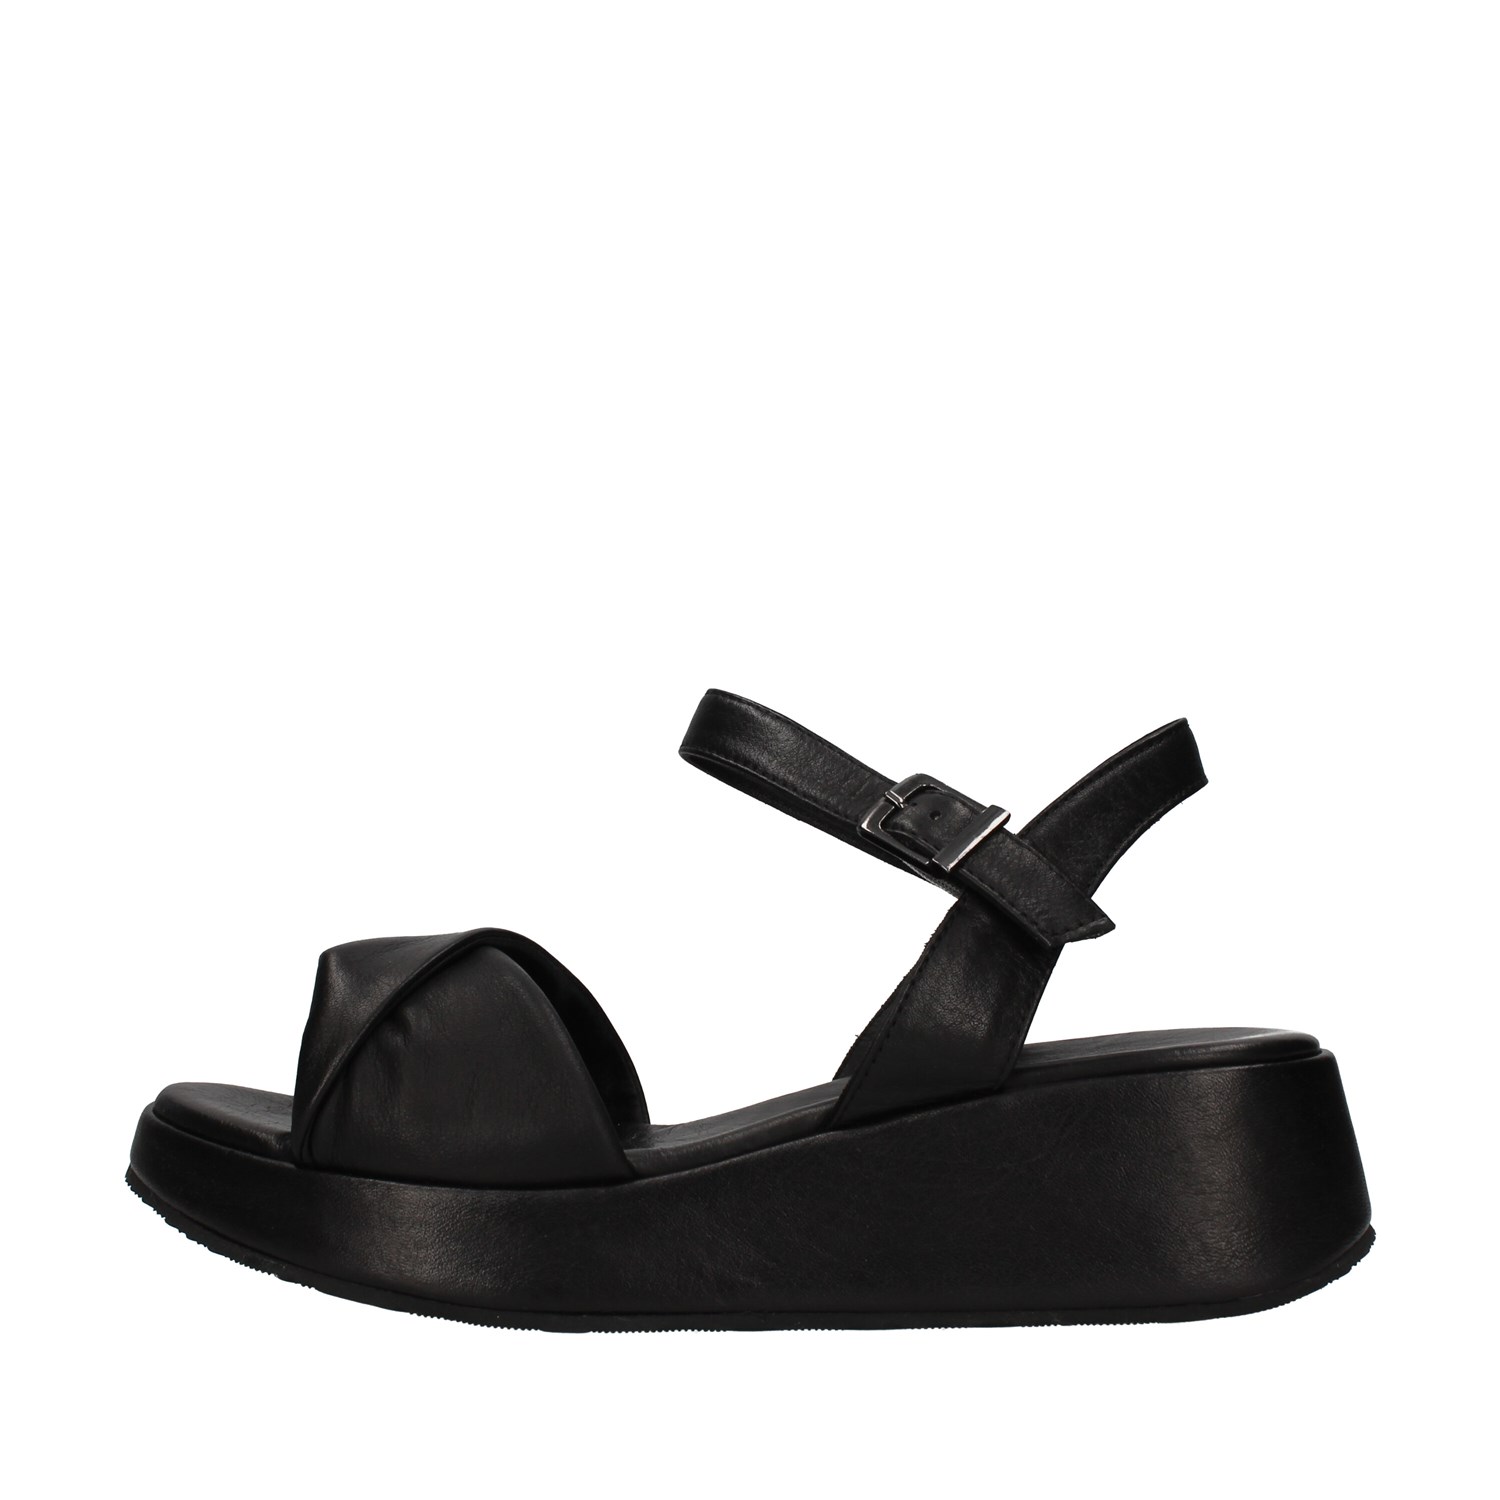 Shaddy Shoes Woman Sandals BLACK 100220315